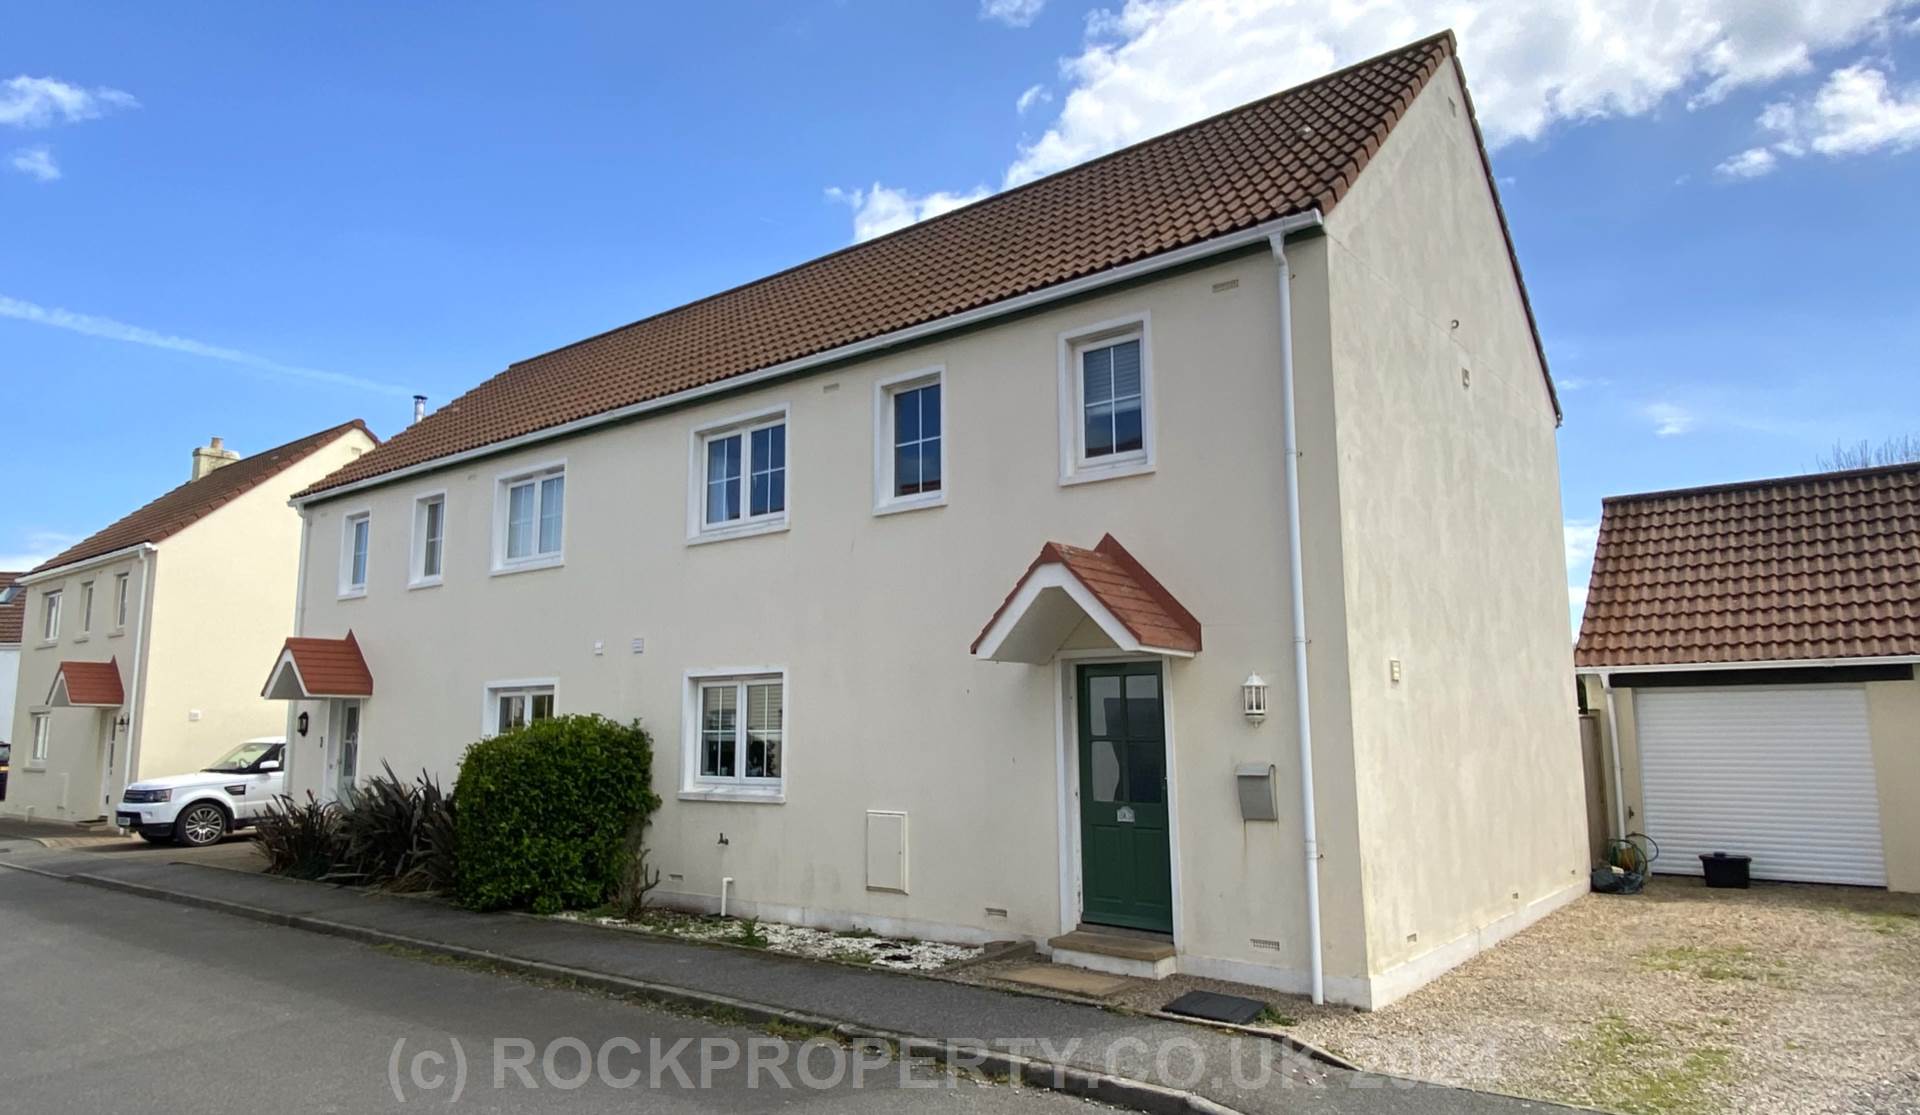 3 DOUBLE BED FAMILY HOME, Popular Sion Village, St John, Image 1